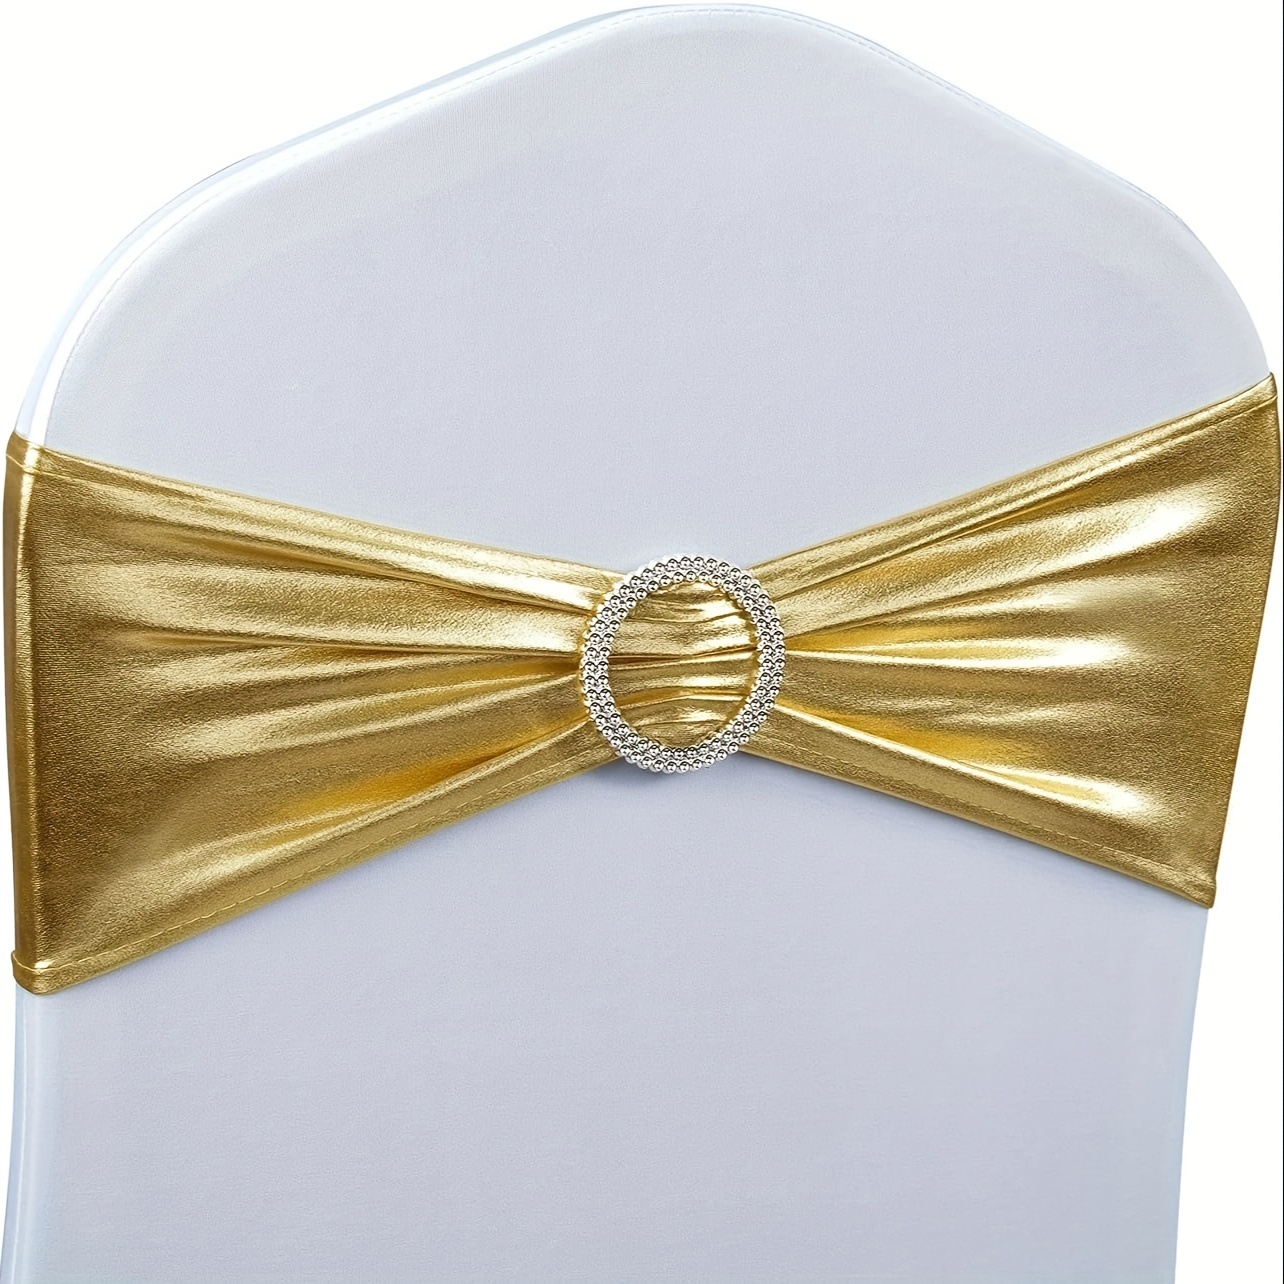 

Golden Bronzing Chair Belt With Free Tie Bow - 20pcs, Elastic Chair Cover Bow Ties For Wedding, Party, Anniversary Banquet Decorations, Polyester, Machine-made